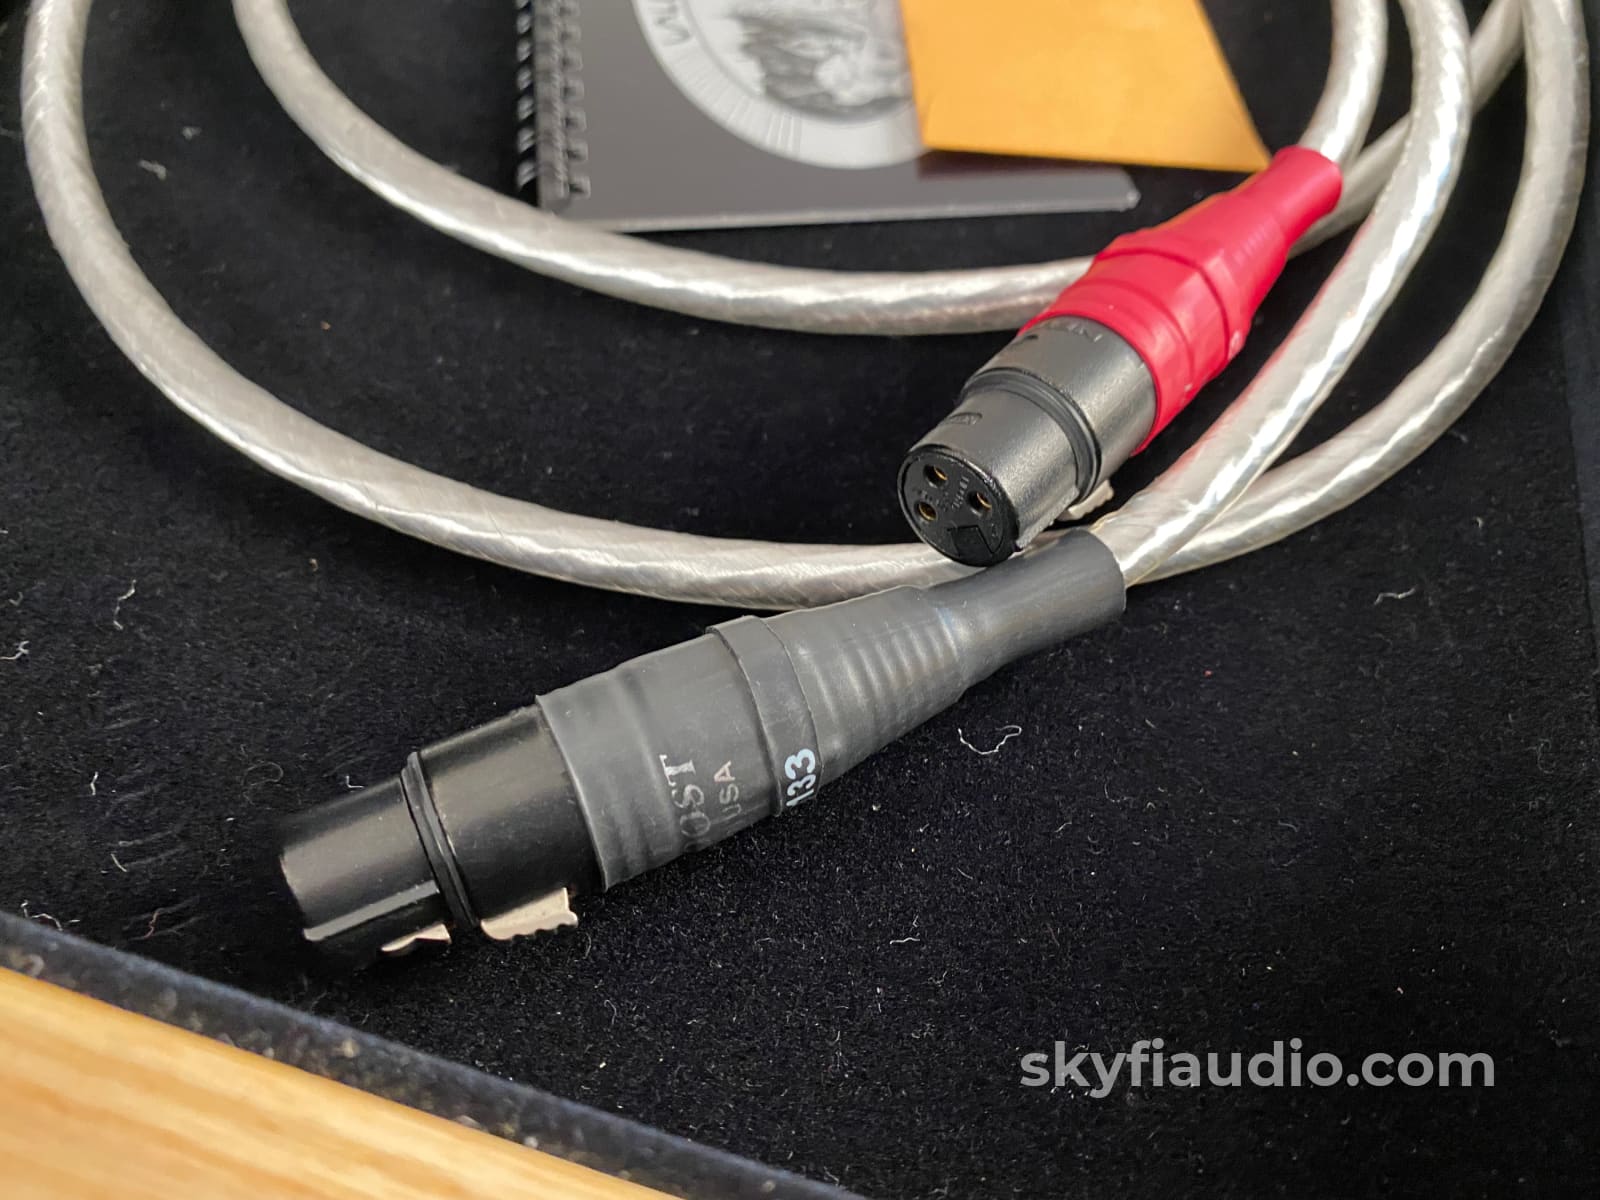 Nordost Valhalla Xlr Interconnects 1M Cables